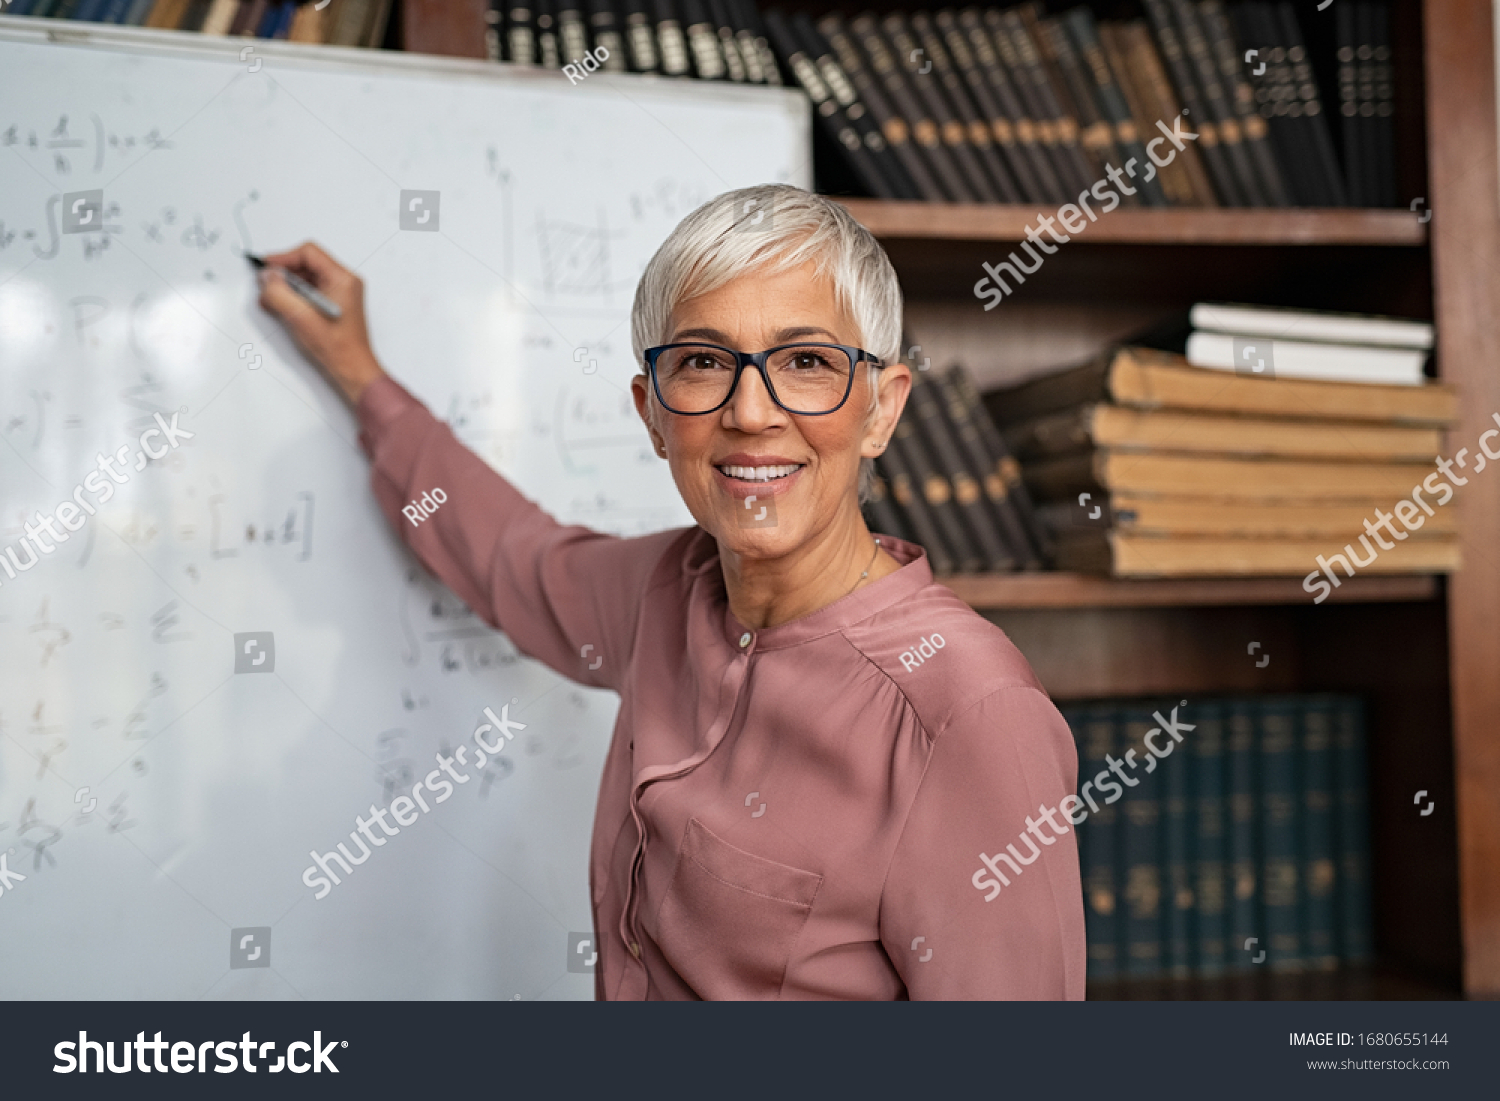 Portrait of happy mature professor teaching mathematics to students in a library. Senior smiling woman solving math problem while writing on white board. Portrait of tutor looking at camera. #1680655144